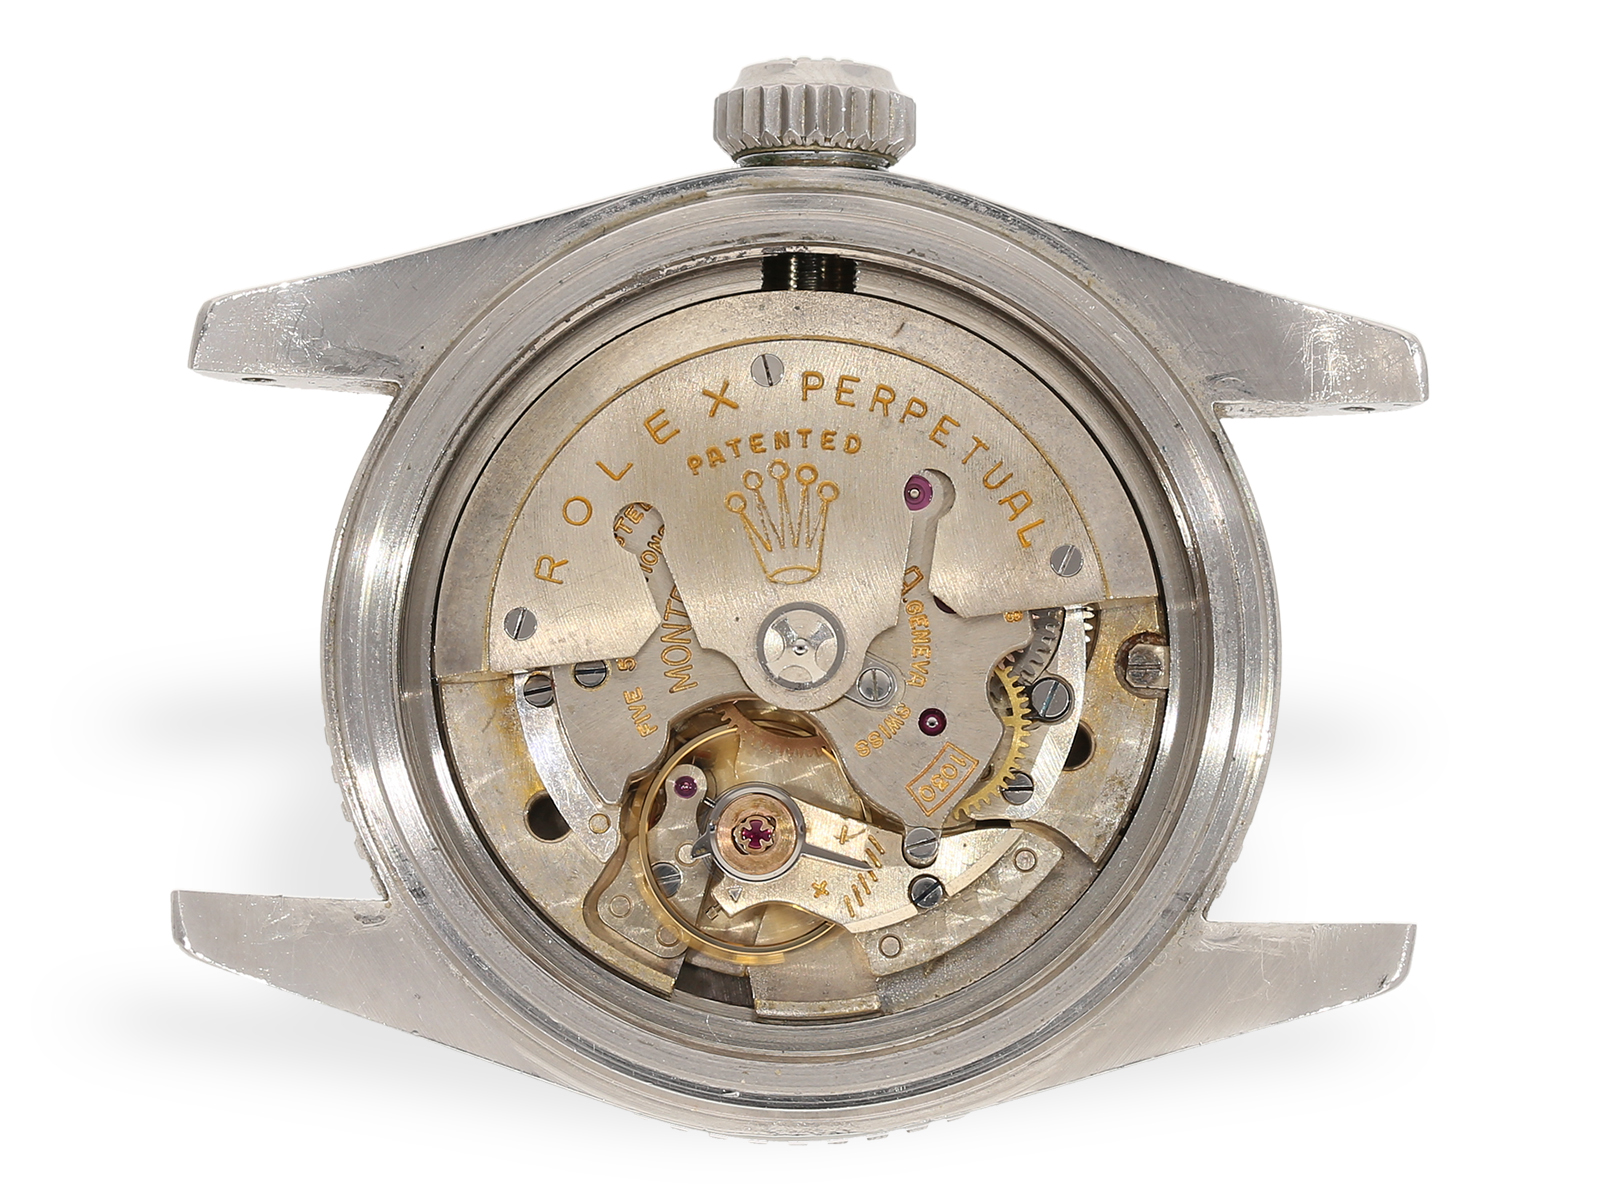 Wristwatch: extremely rare Rolex Submariner Ref. 6538 Big Crown-Four Liner, ca. 1958 - Image 4 of 9